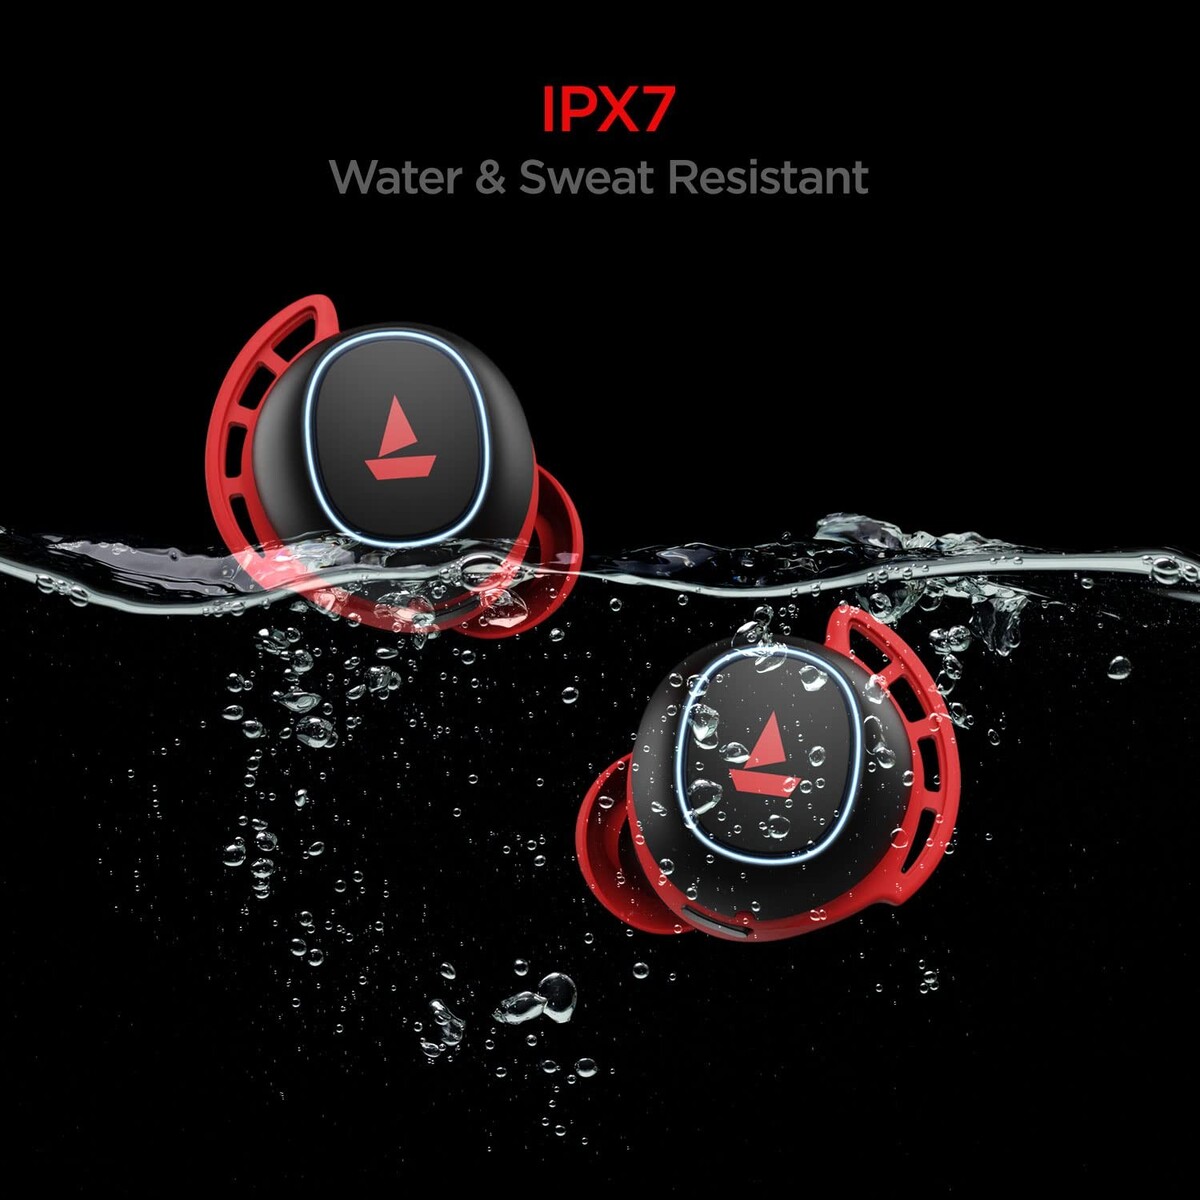 Boat TWS Airdopes 441 Pro RTL Wireless Earbuds with IPX7 Sweat and Water Resistance, Red